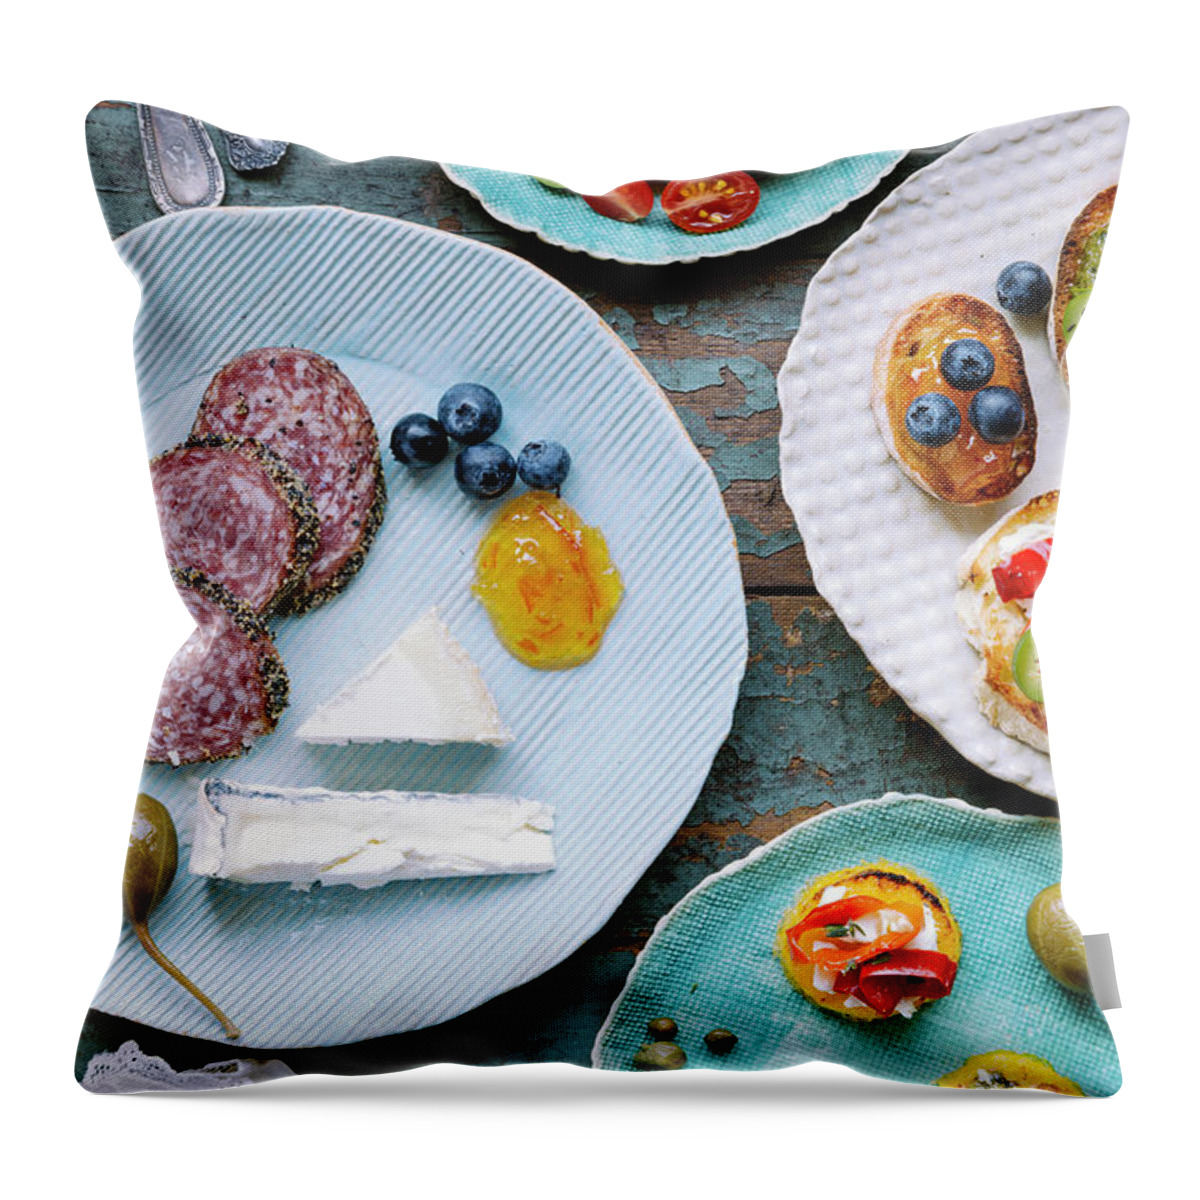 Nicolesy Throw Pillow featuring the photograph Tapas by Nicole Young